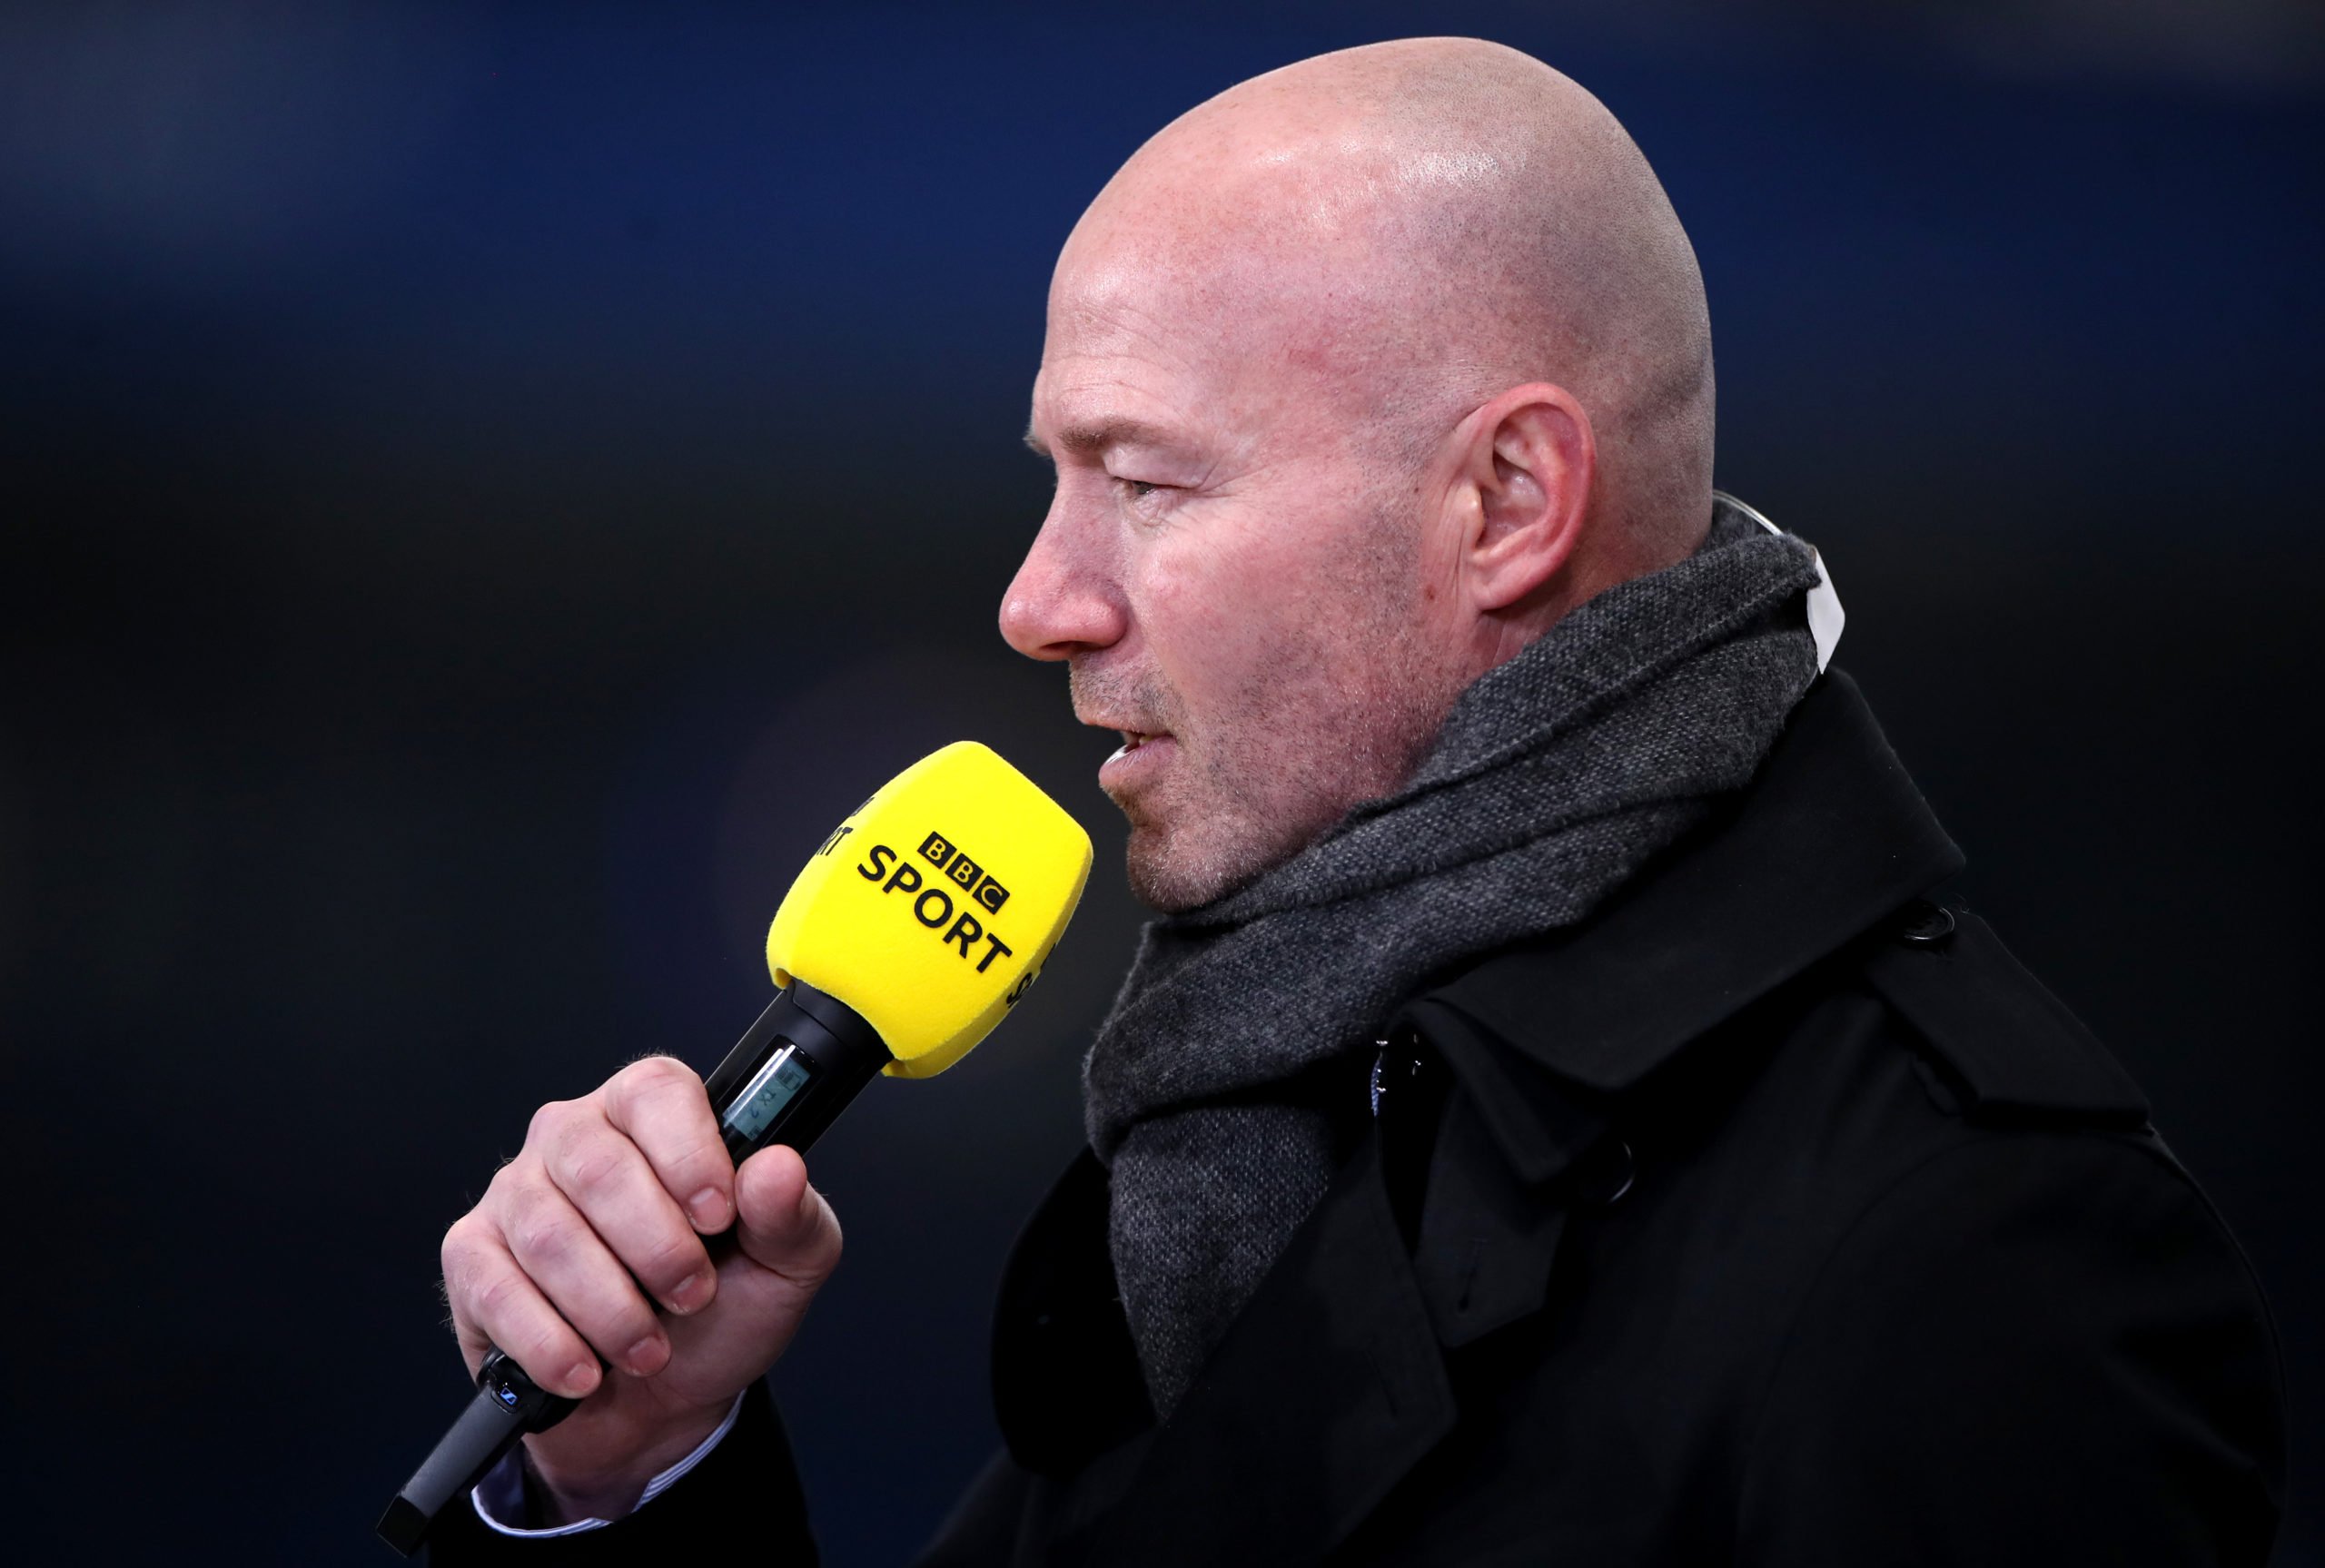 Alan Shearer delivers passionate speech which shows he gets the West Ham way after Declan Rice cup heroics